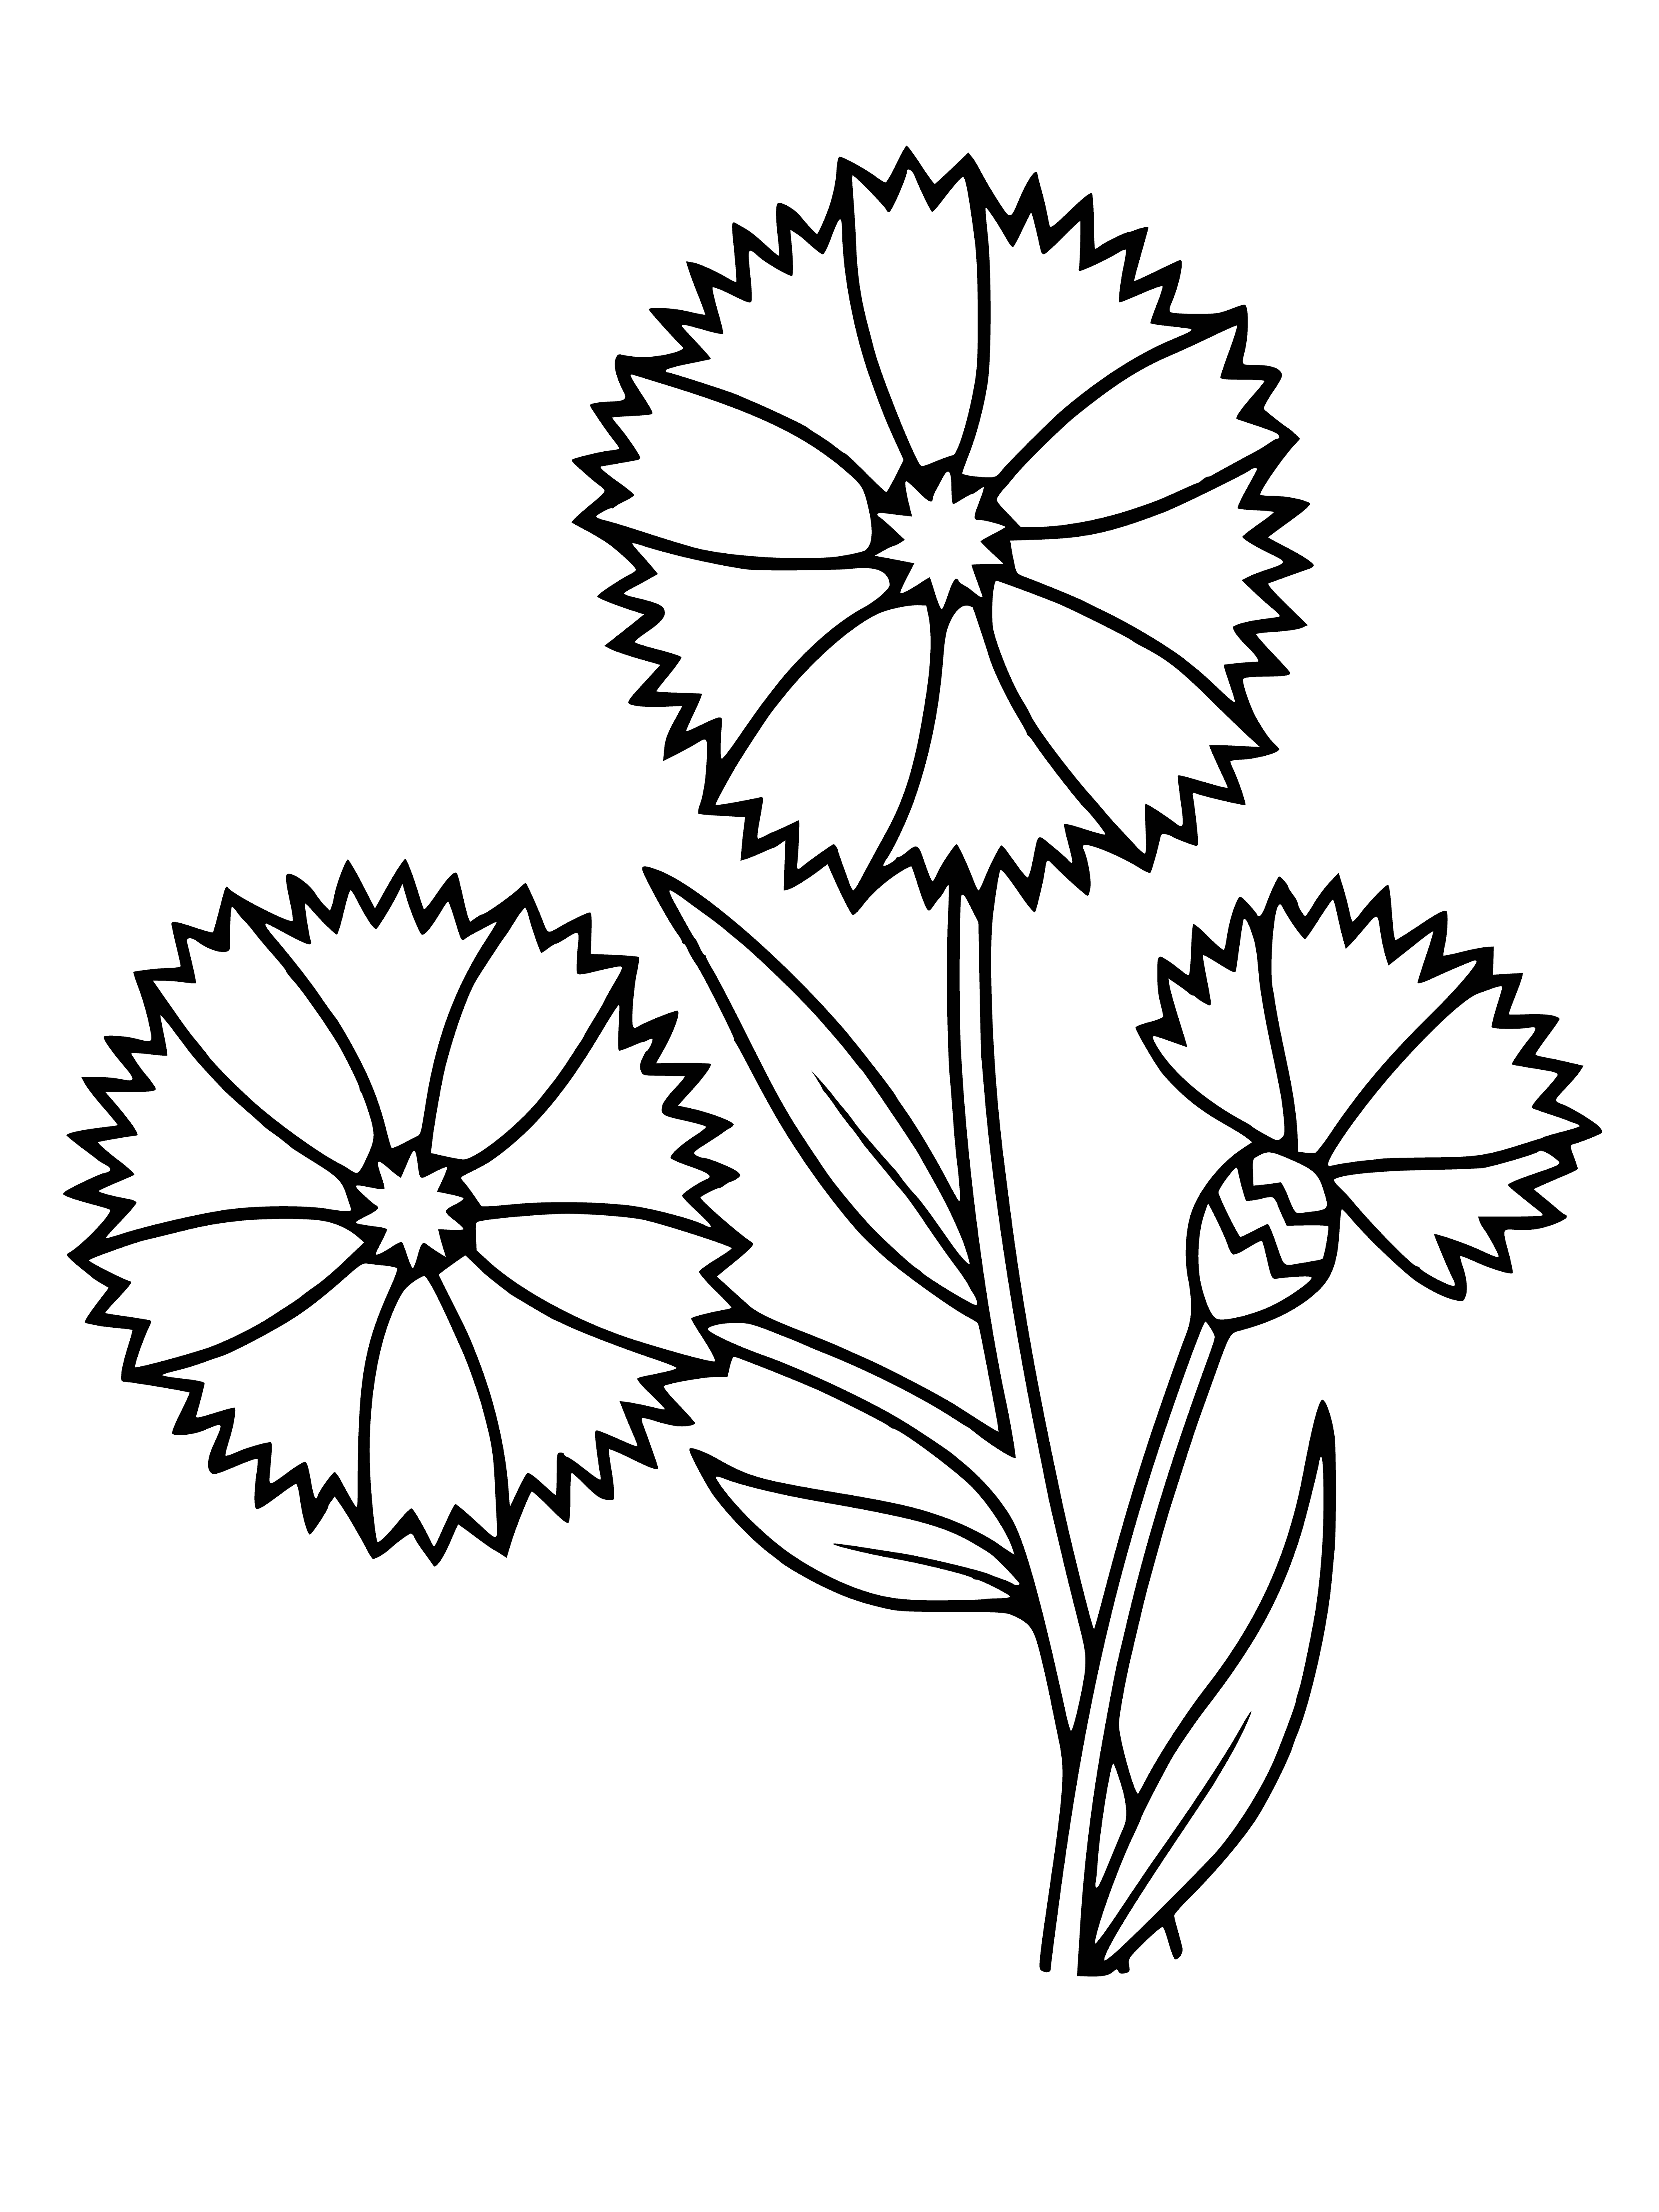 Cornflowers coloring page